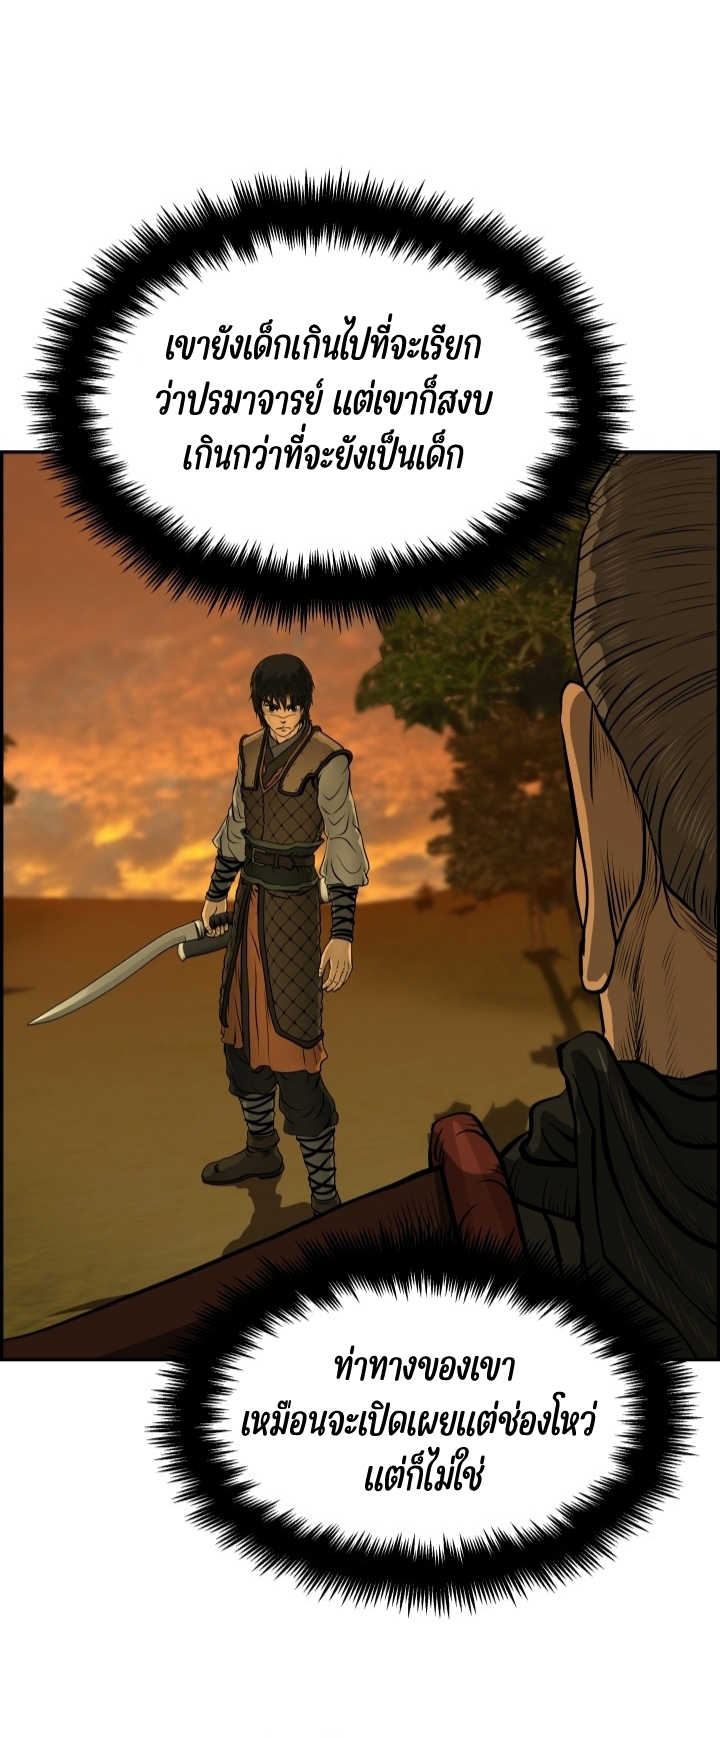 Blade of Wind and Thunder 28 (39)